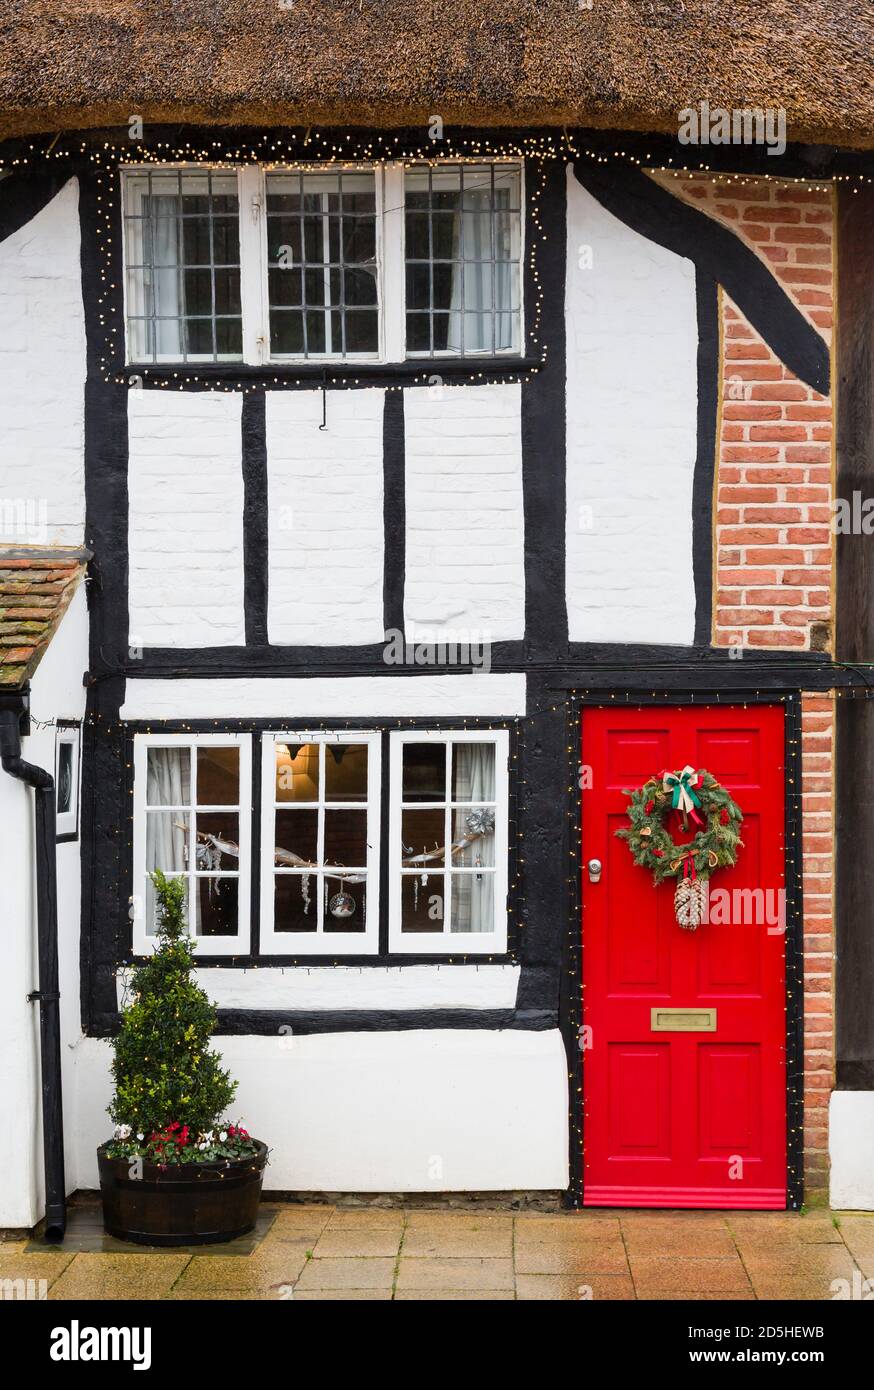 WINSLOW, UK - December 26, 2019. Christmas decorations outside old thatched cottage house in UK, winter street scene Stock Photo